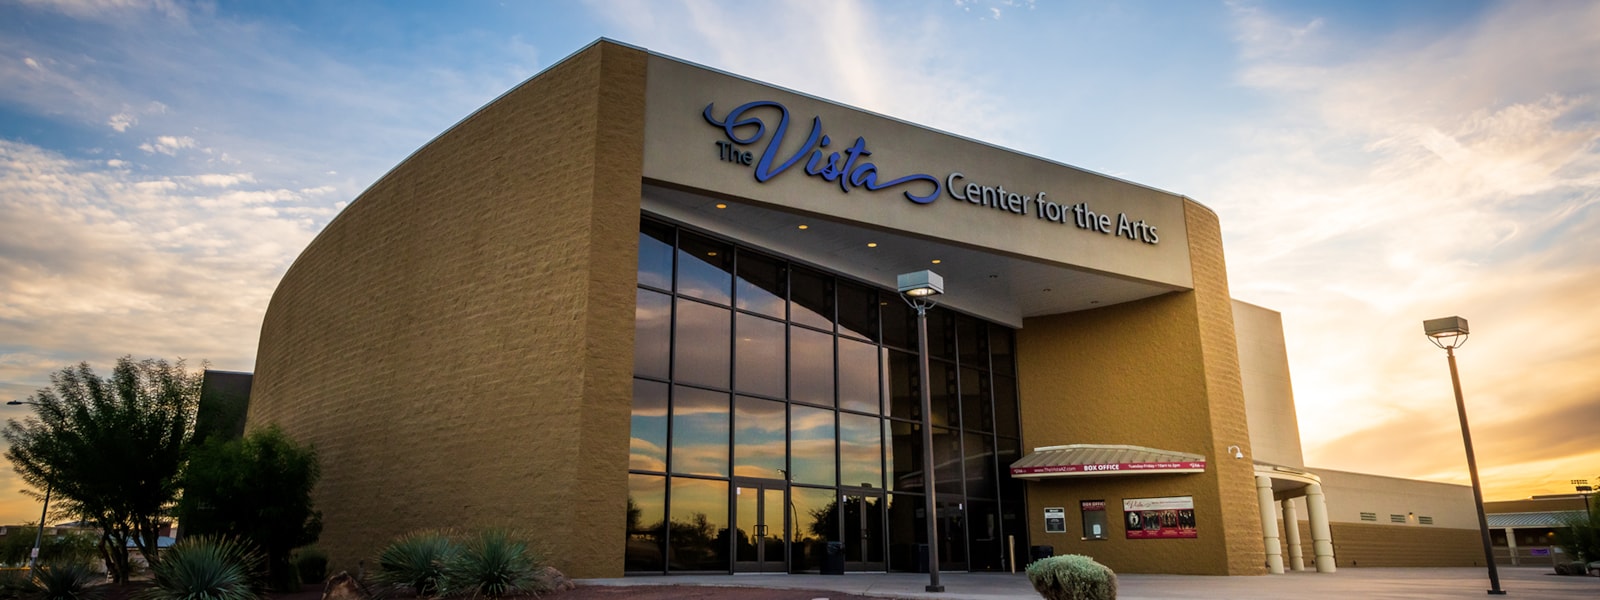 Picture of exterior of the Vista Center for the Arts at sunset